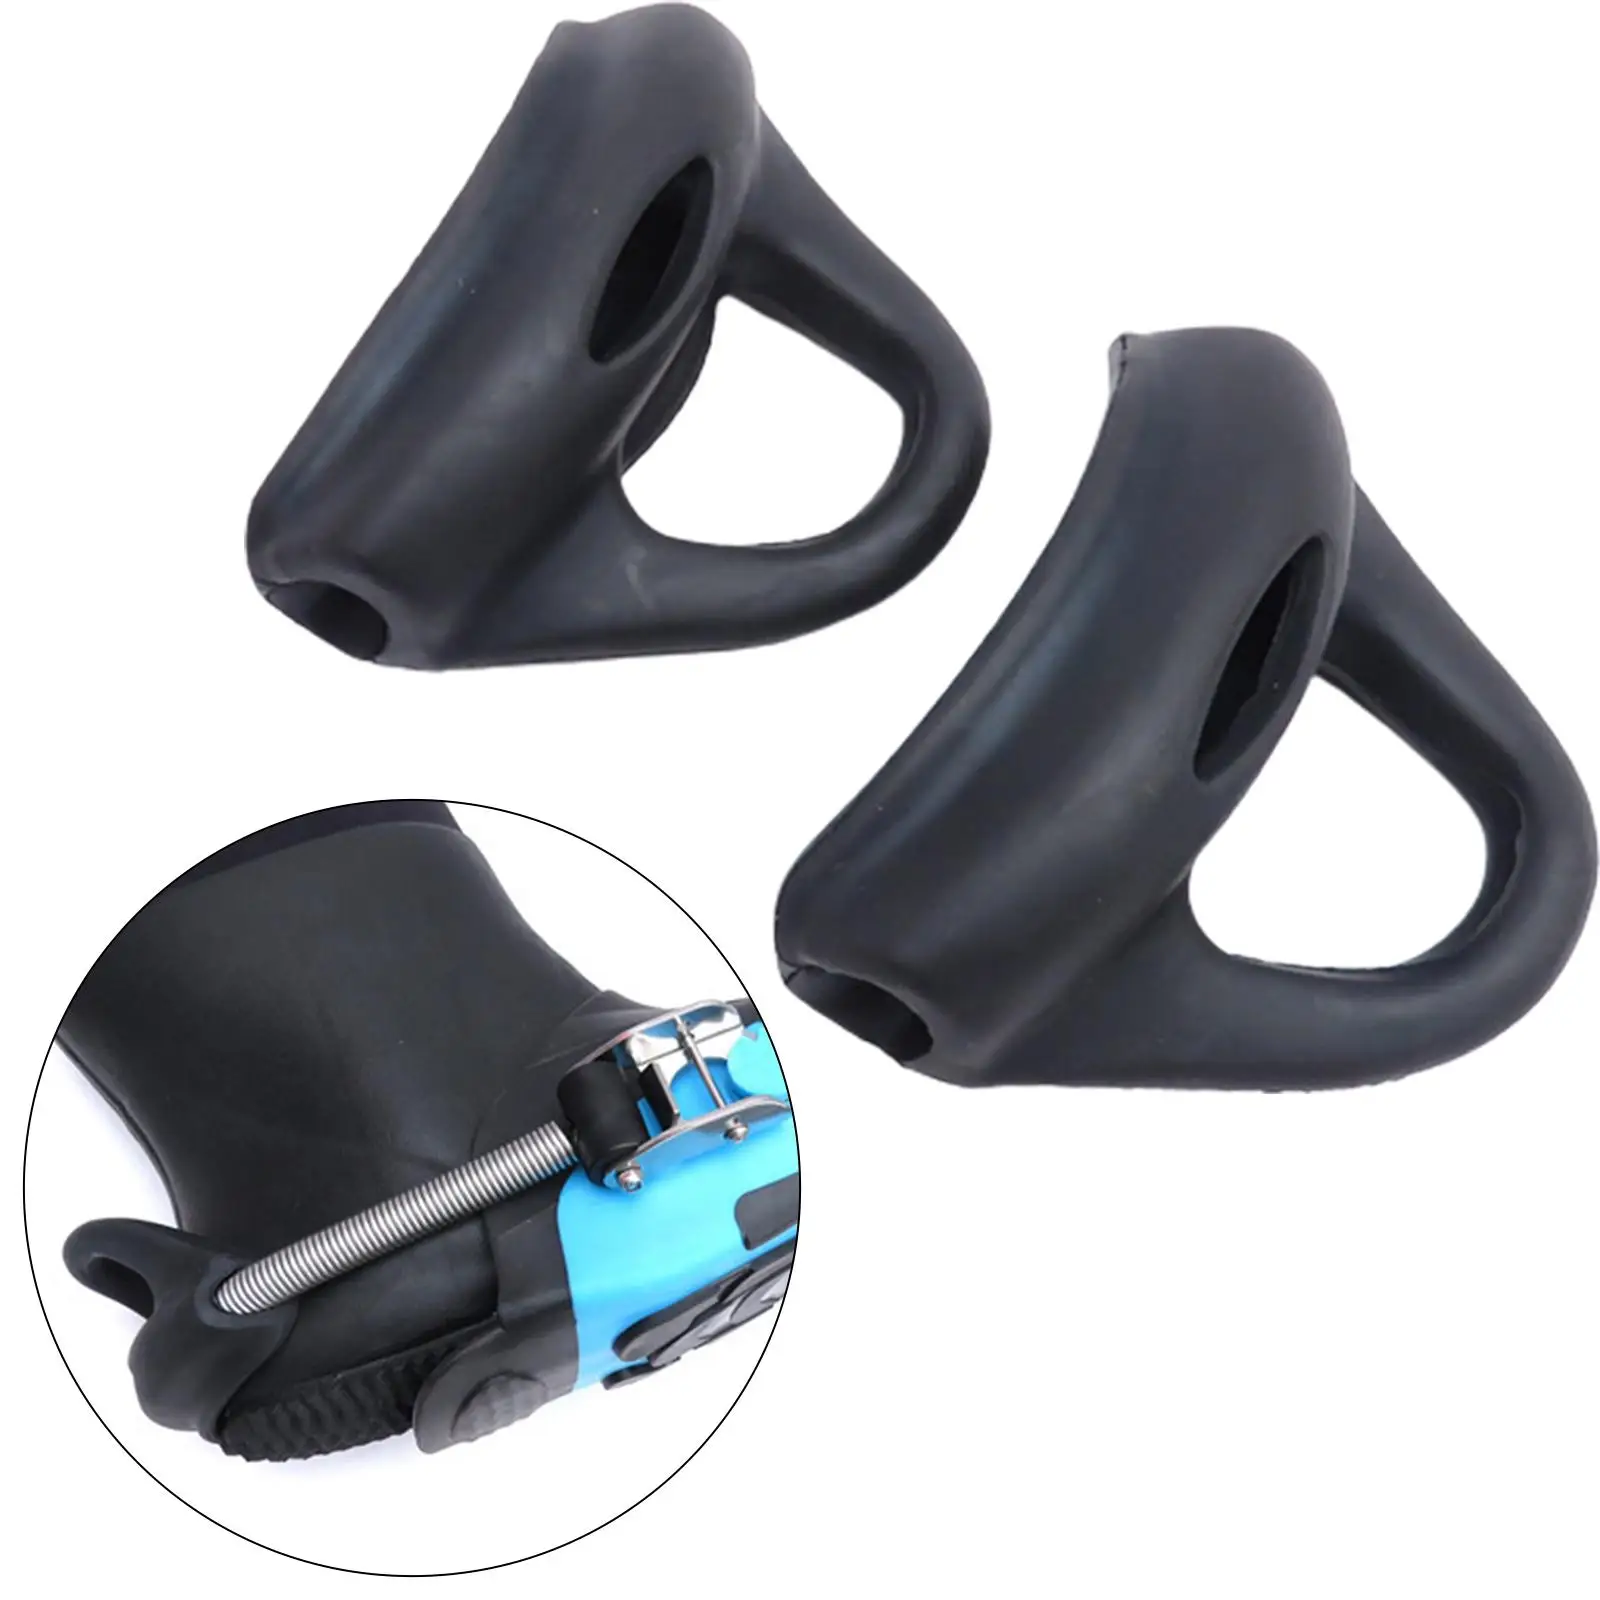 Comfortable Scuba Diving Spring Strap Heel Nonslip Replace Footwear Parts Buckles  Heel for Swimming, Canoeing, Water Sports